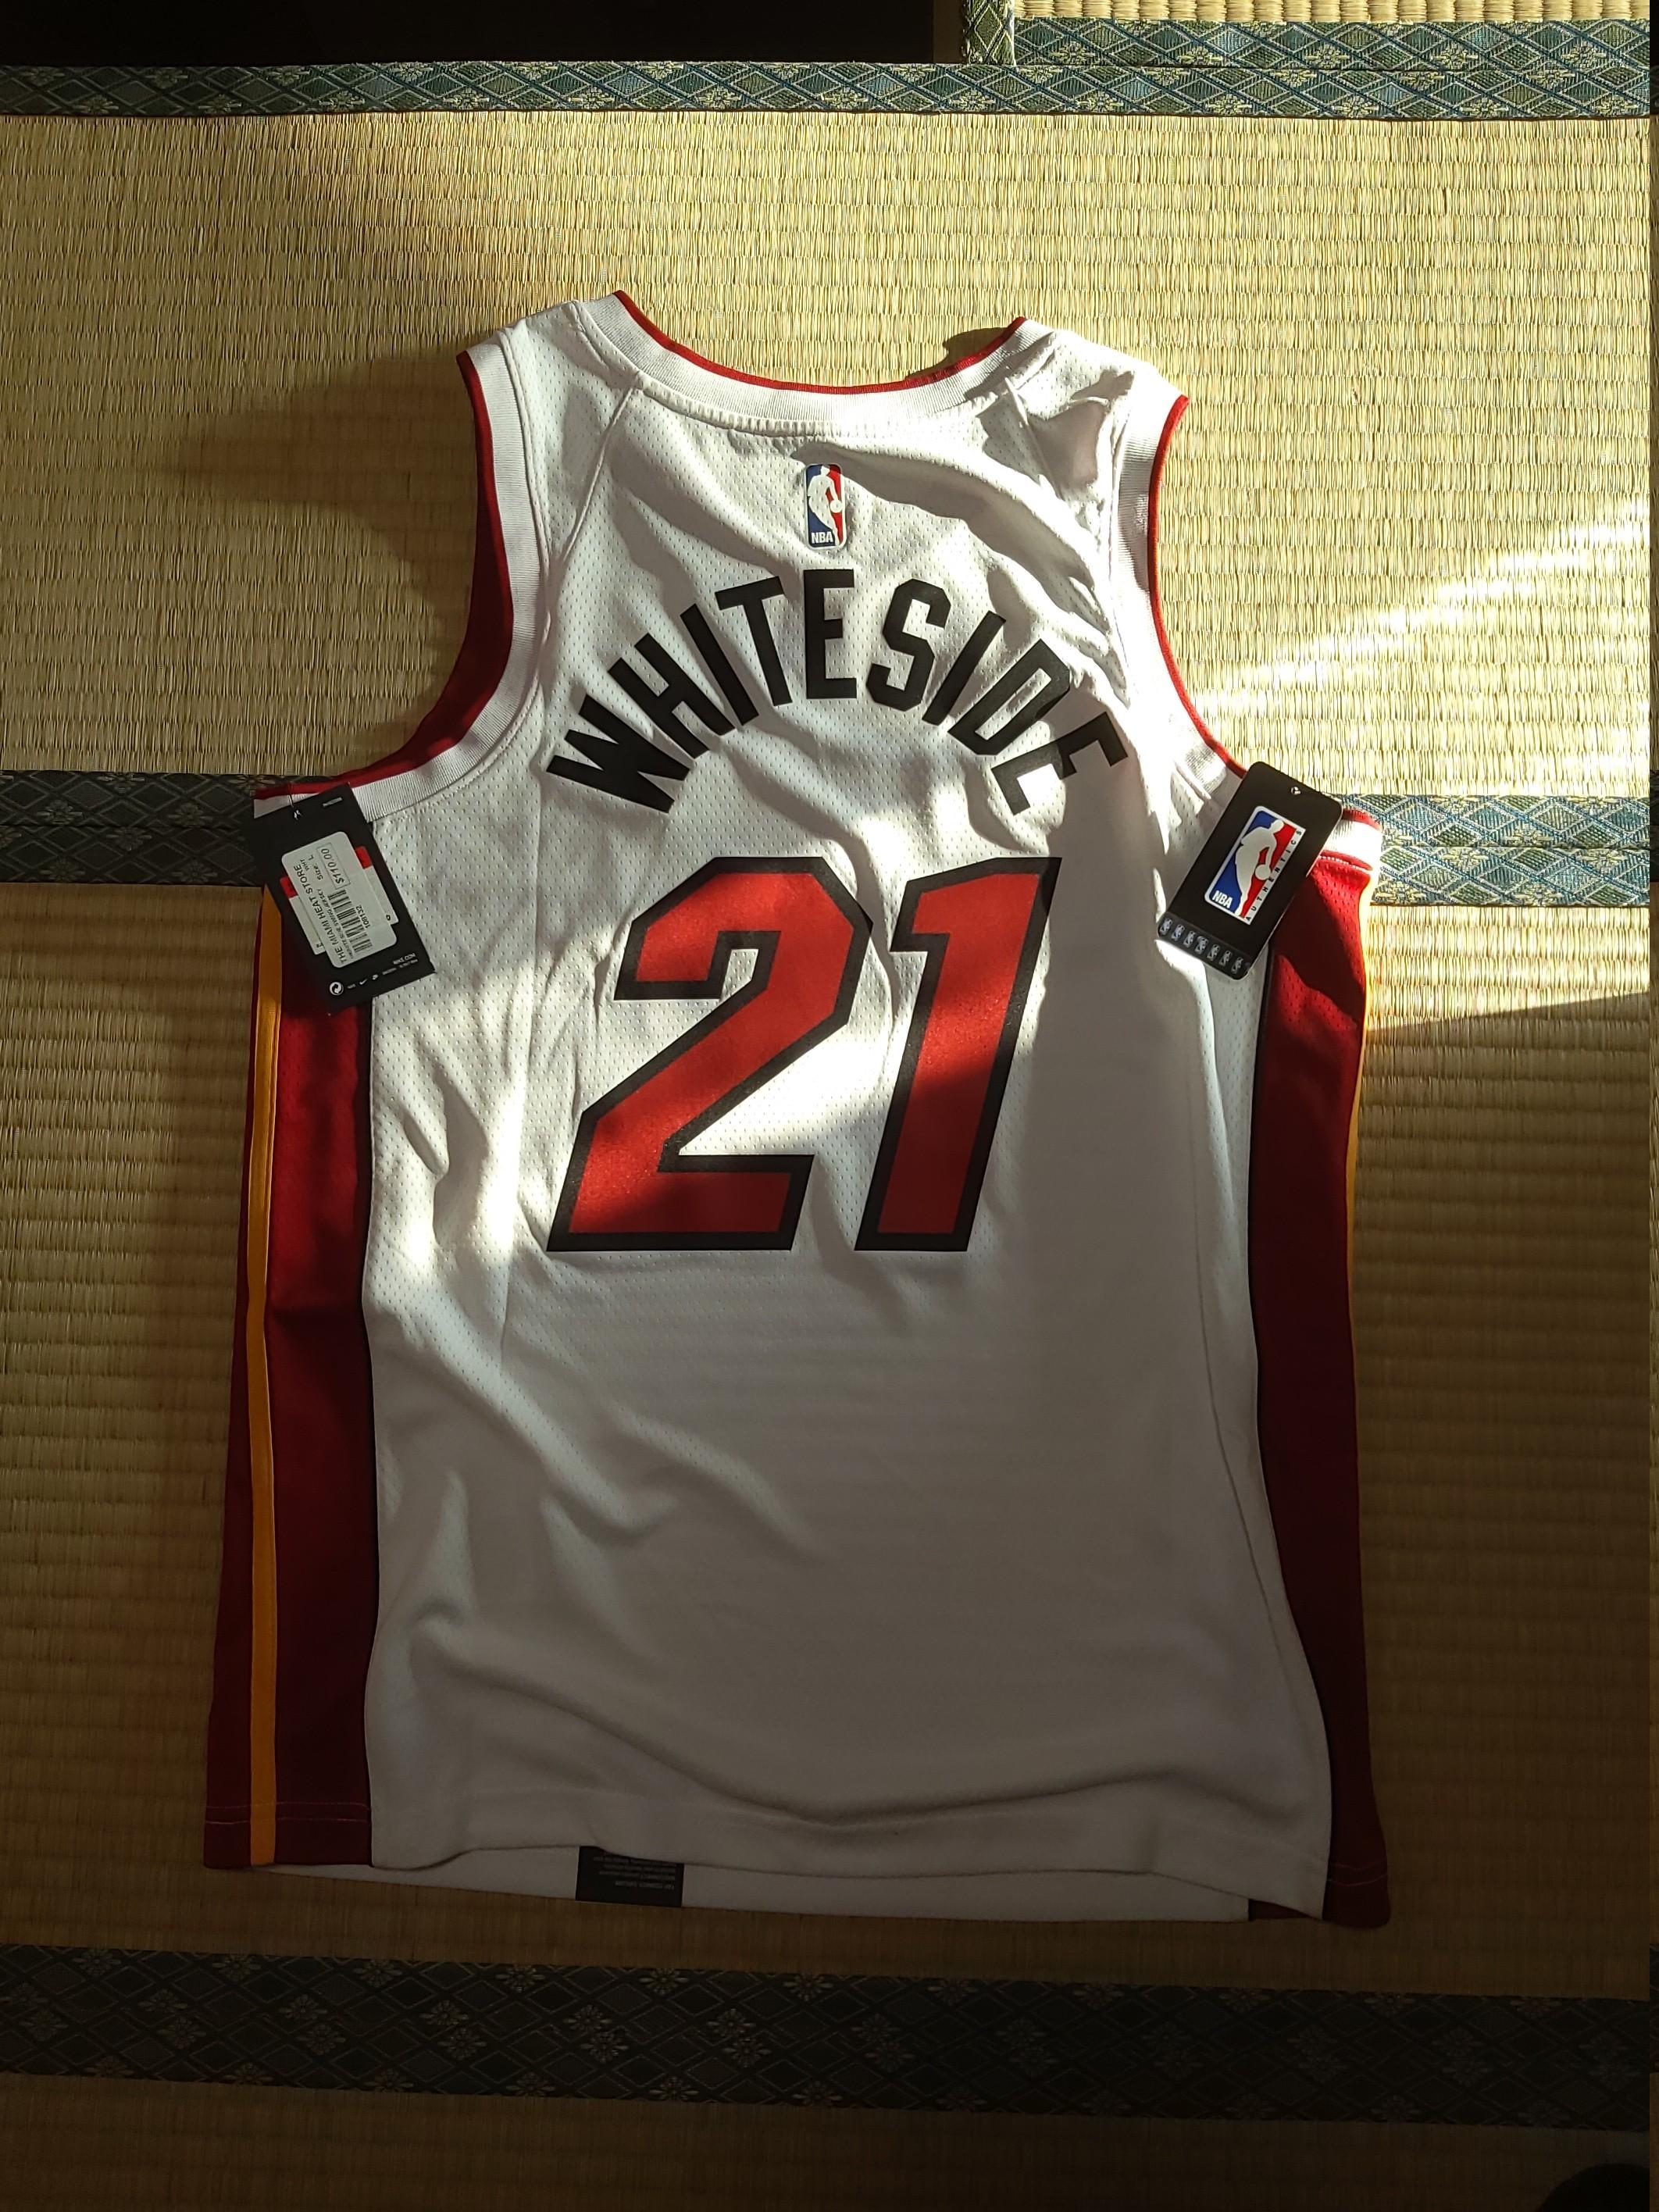 hassan whiteside jersey for sale